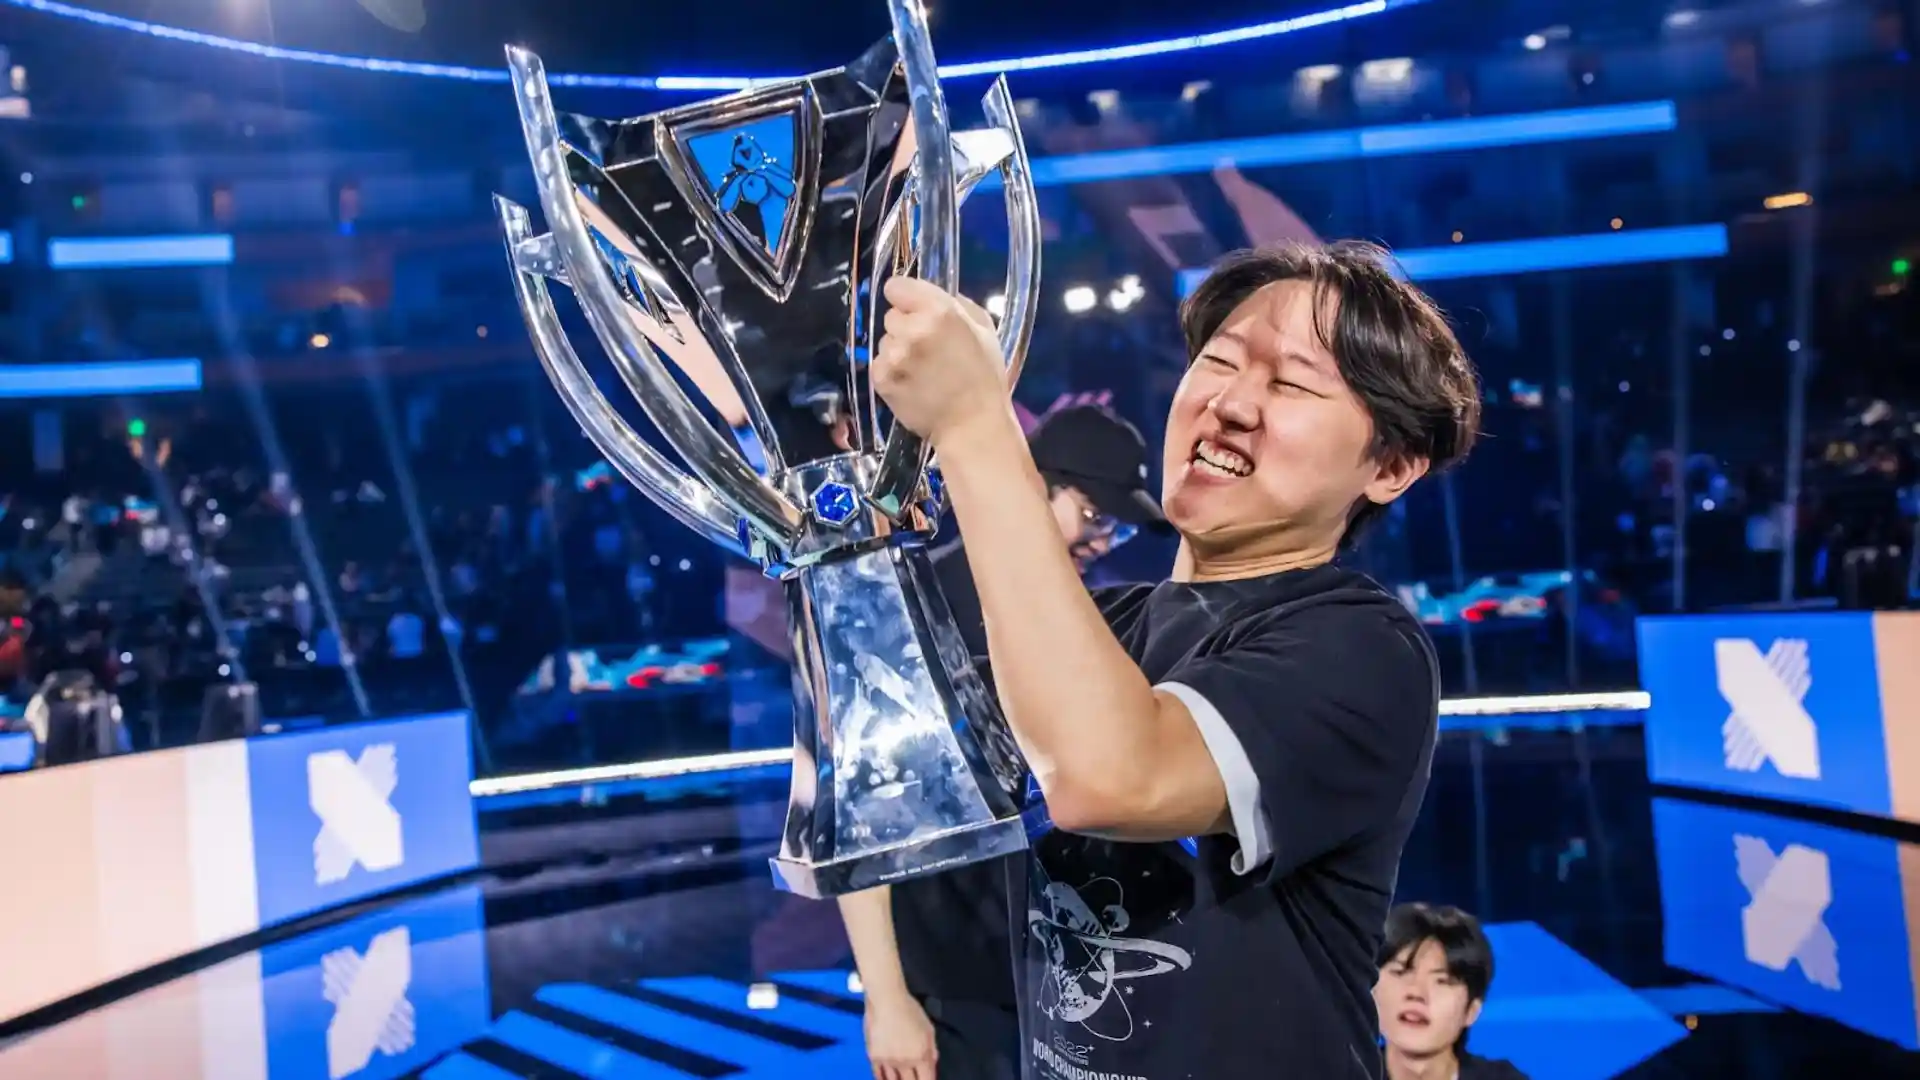 Pyosik Is Reportedly Joining Team Liquid